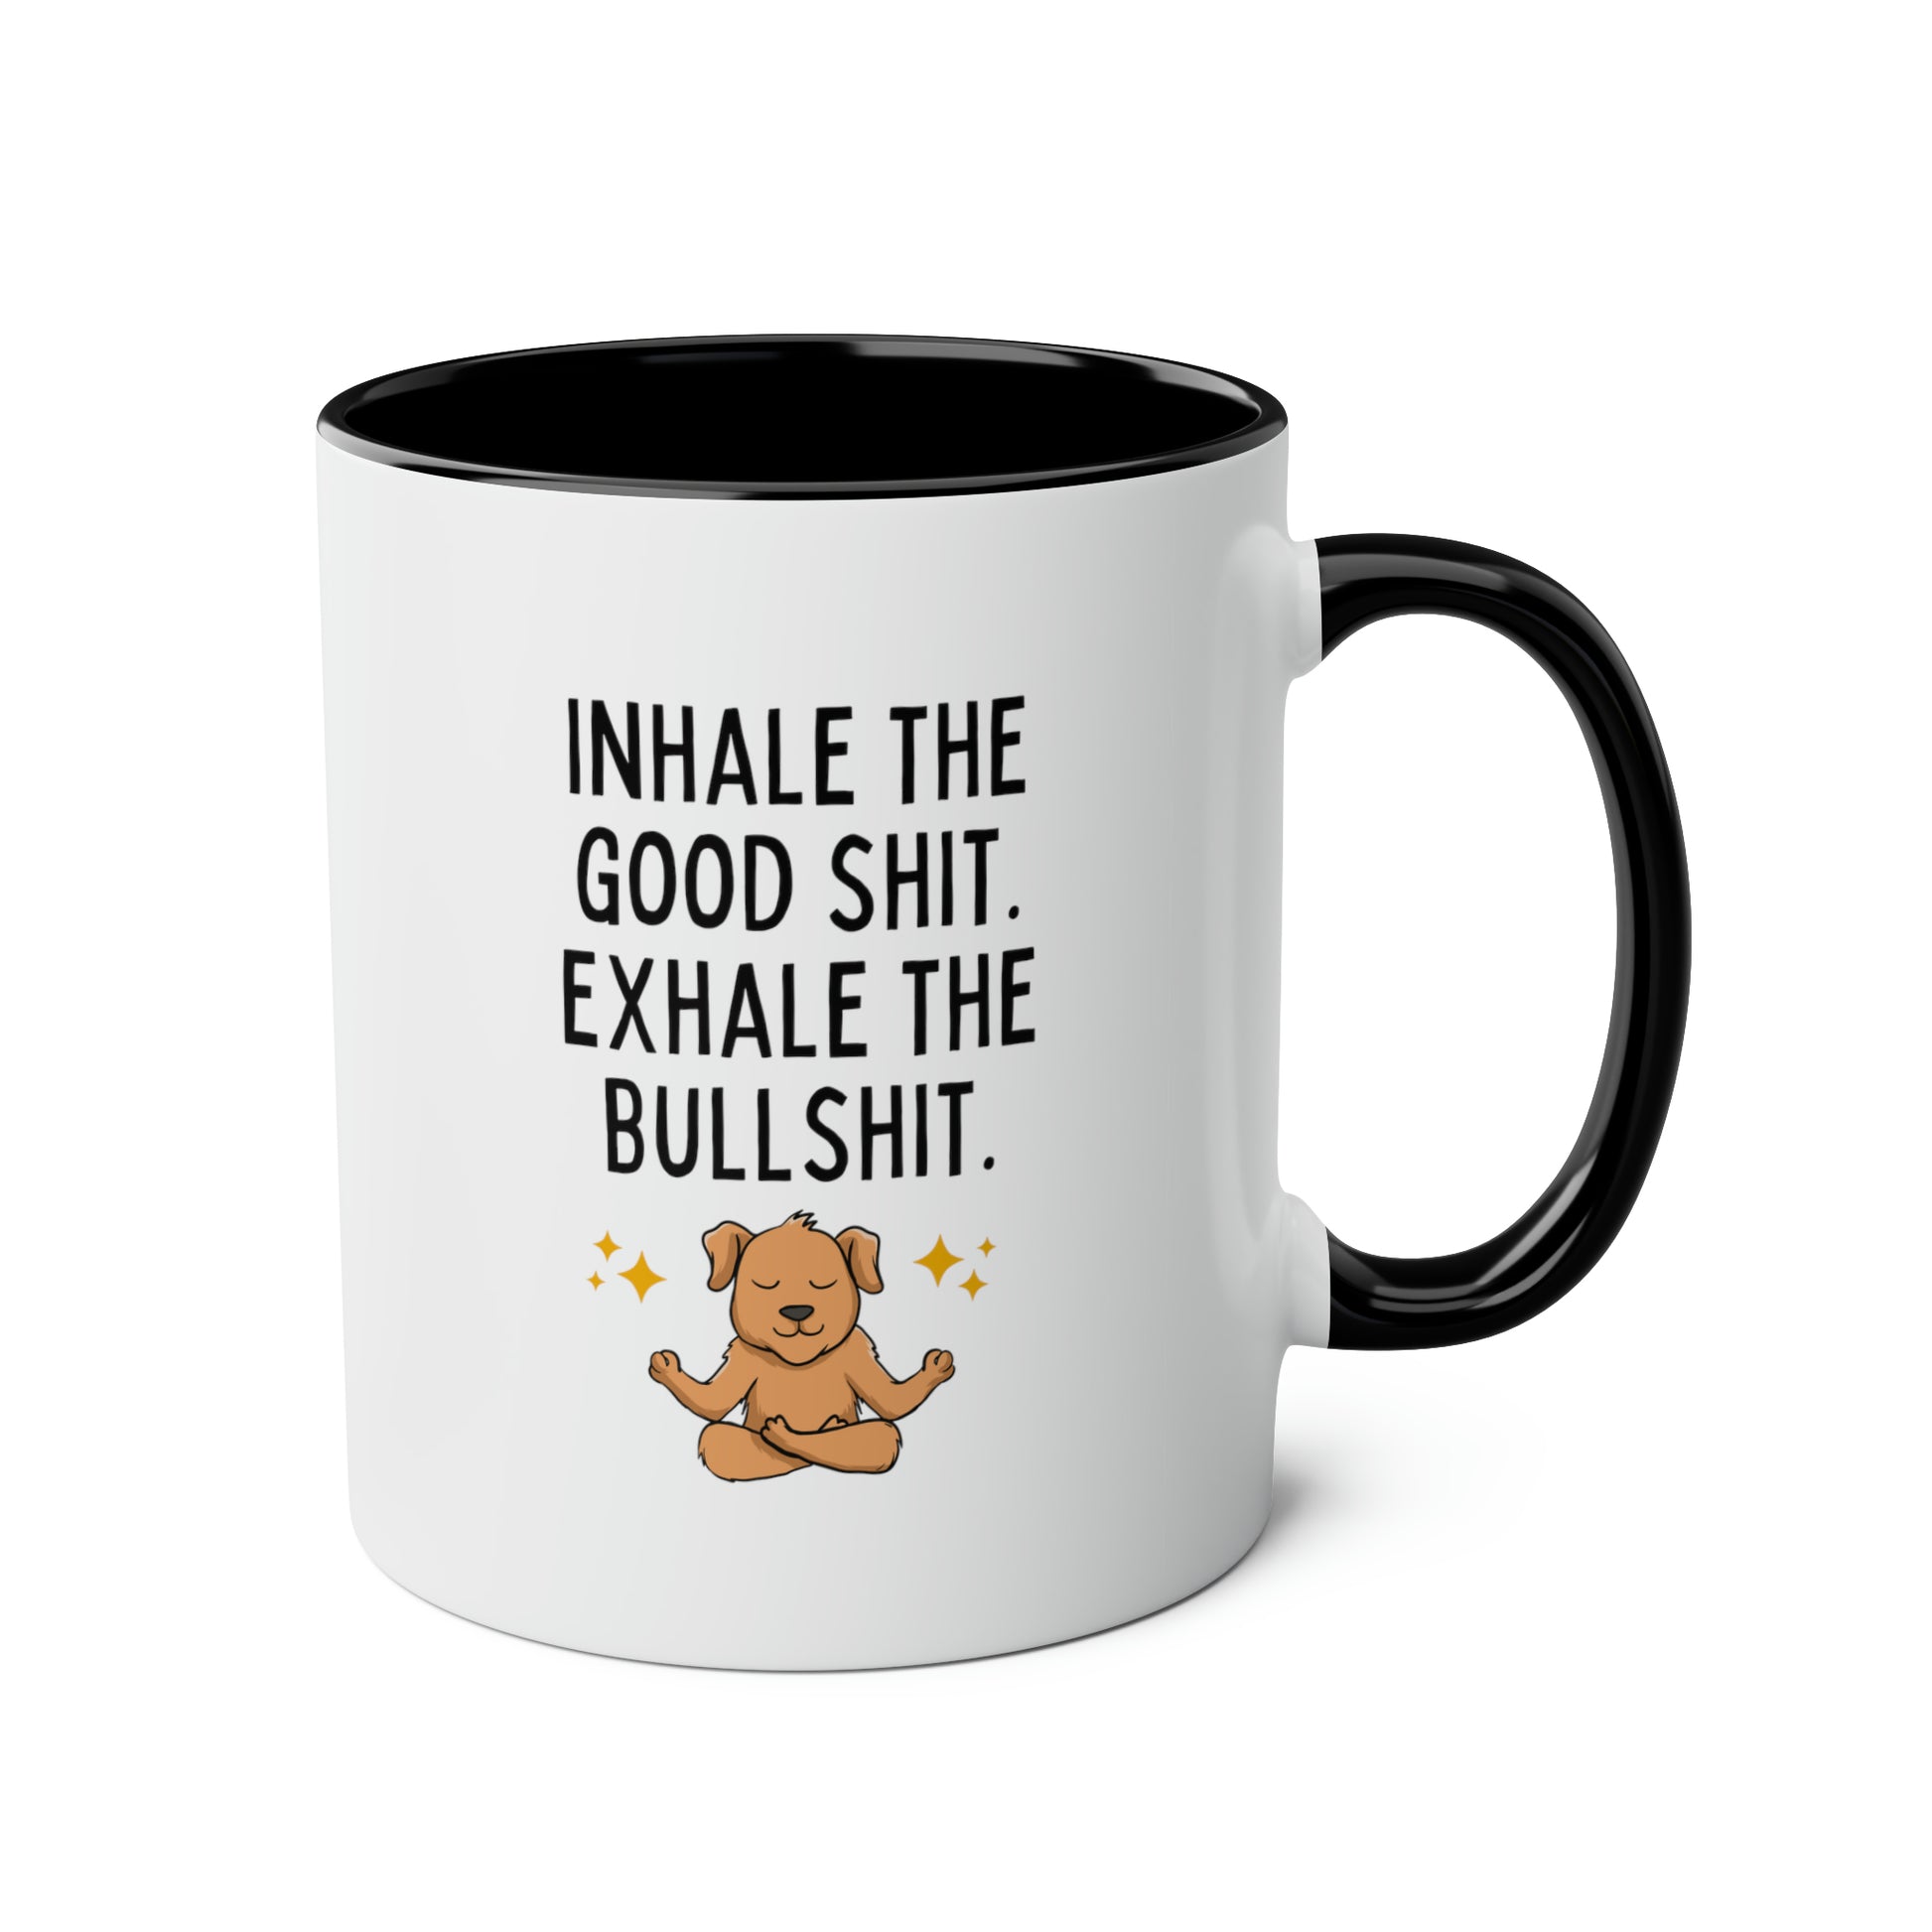 Inhale the Good Shit Exhale the Bullshit 11oz white with black accent funny large coffee mug gift for dog yoga lover fur mom BS cuss sarcastic curse cup waveywares wavey wares wavywares wavy wares